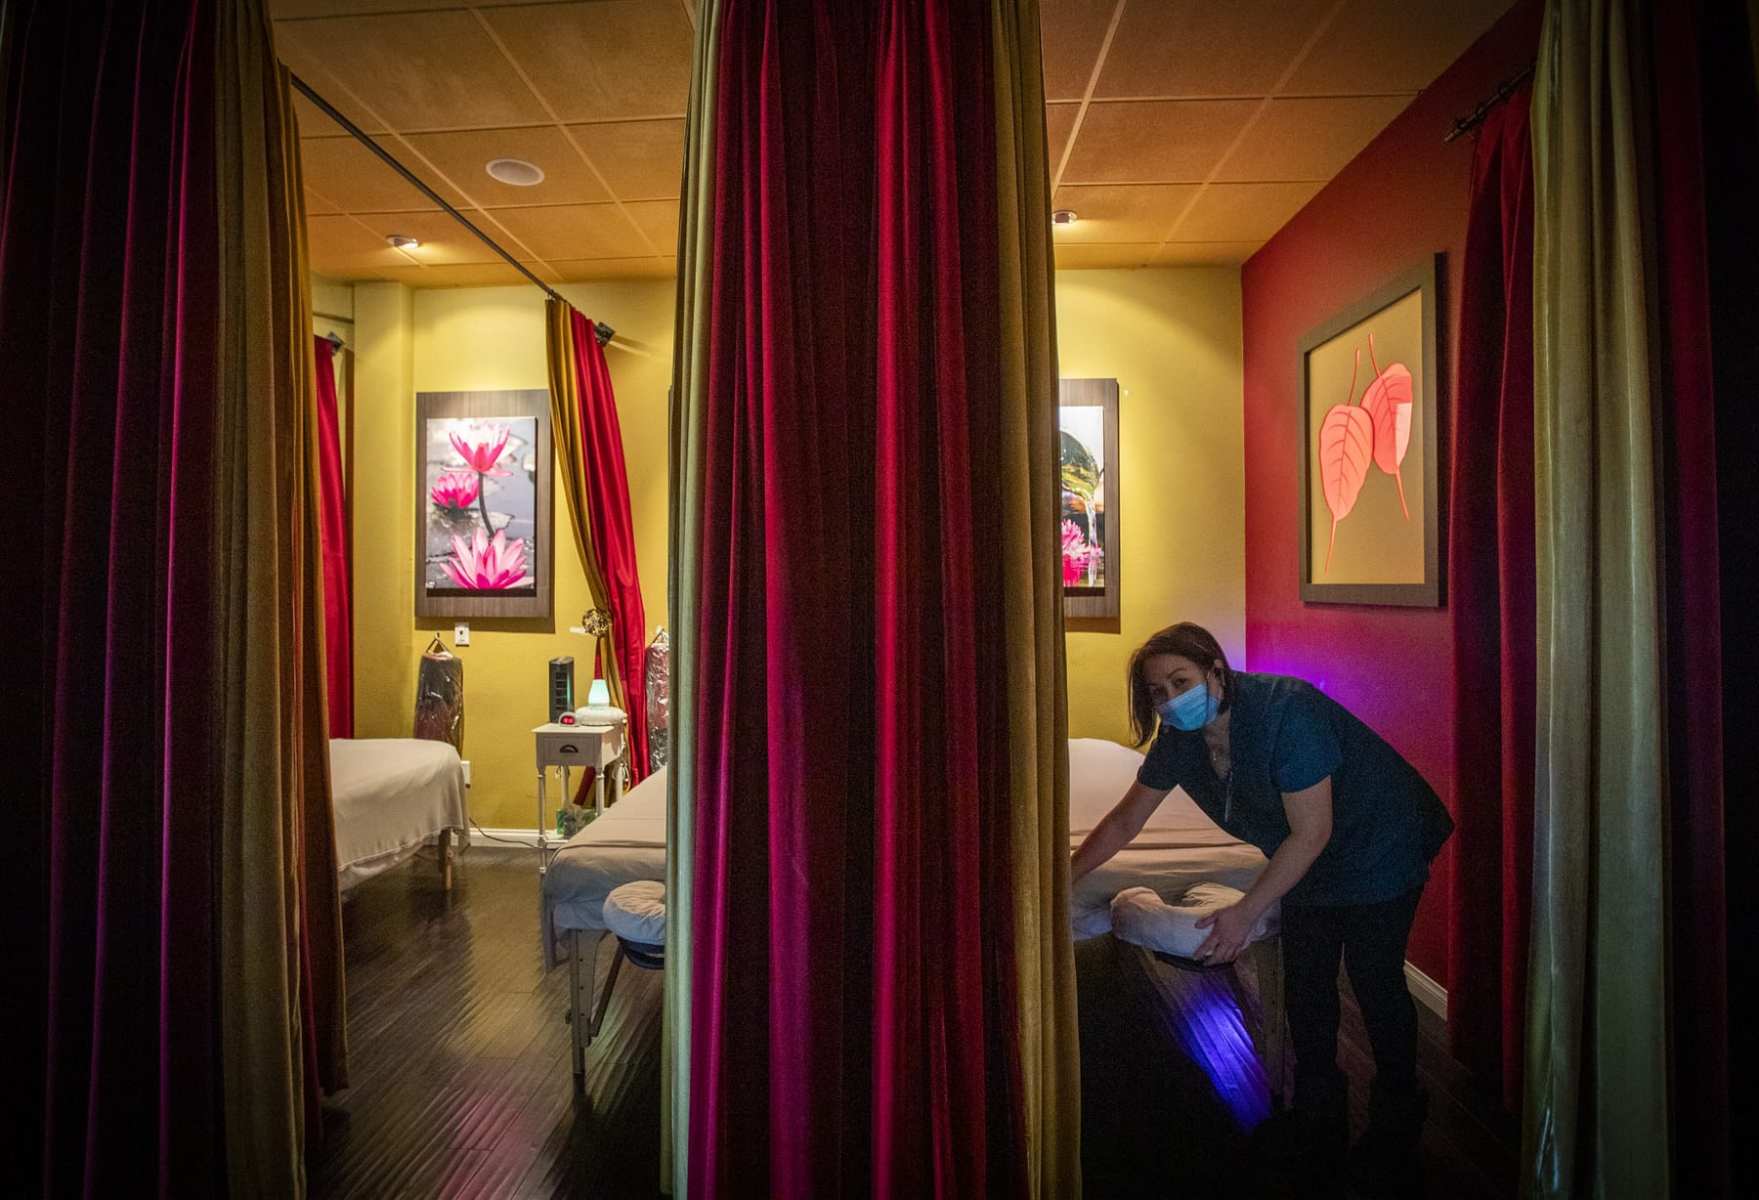 A woman makes a bed in a health spa.